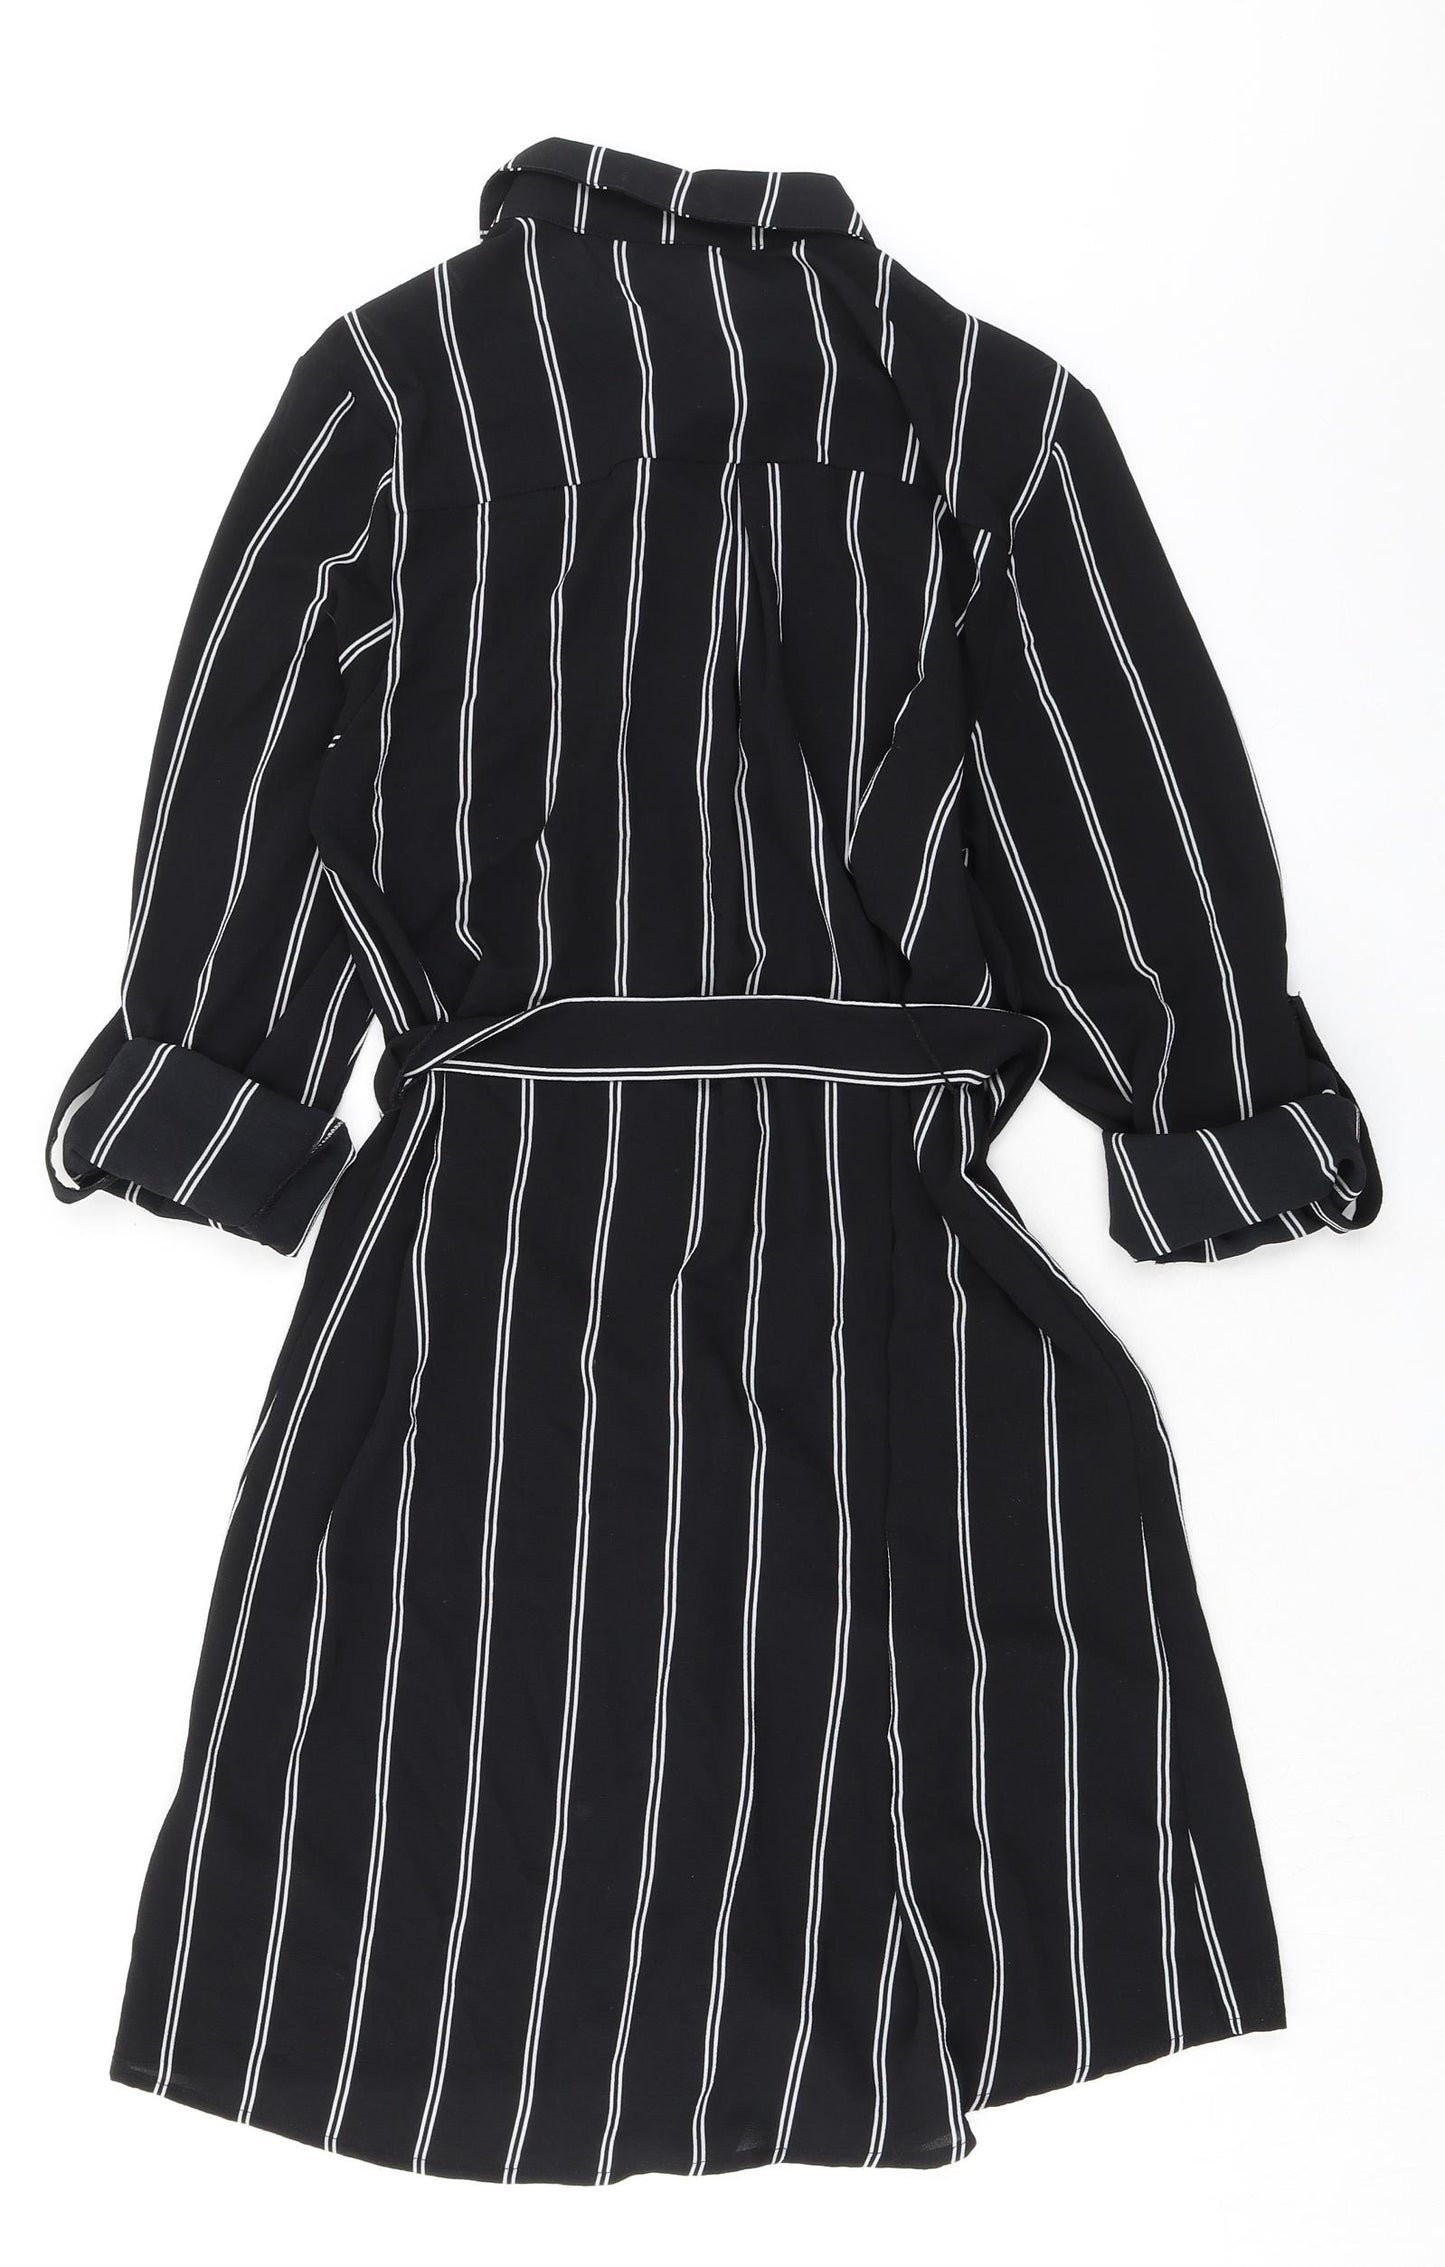 Cameo Rose Womens Black Striped Polyester Shirt Dress Size 10 Collared Button - Belted